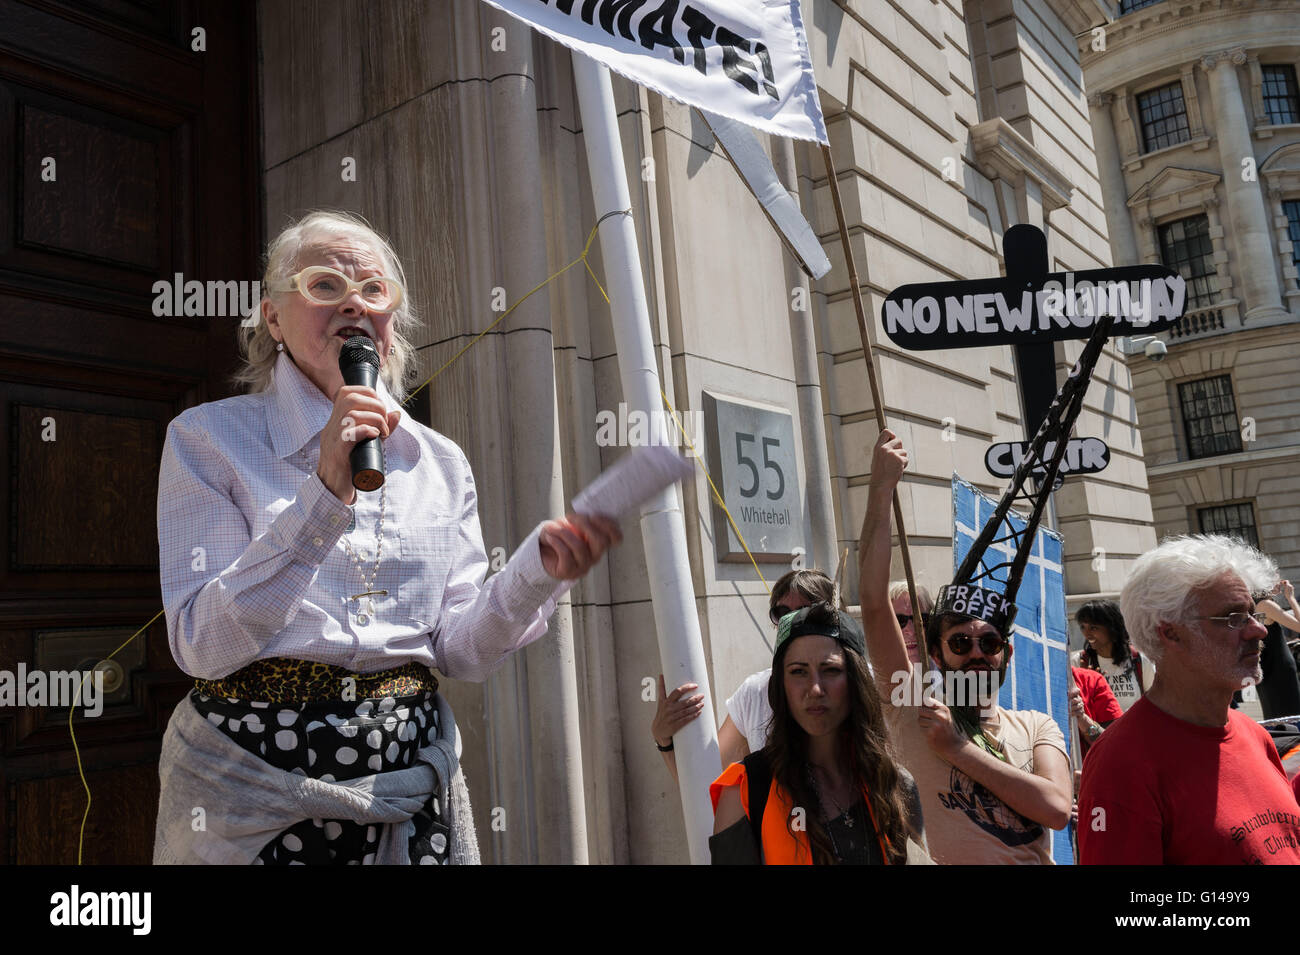 London, UK. 08th May 2016. Dame Vivienne Westwood makes a speech during 'Going Backwards on Climate Change' protest by the Department of Energy & Climate Change. Wiktor Szymanowicz/Alamy Live News Stock Photo